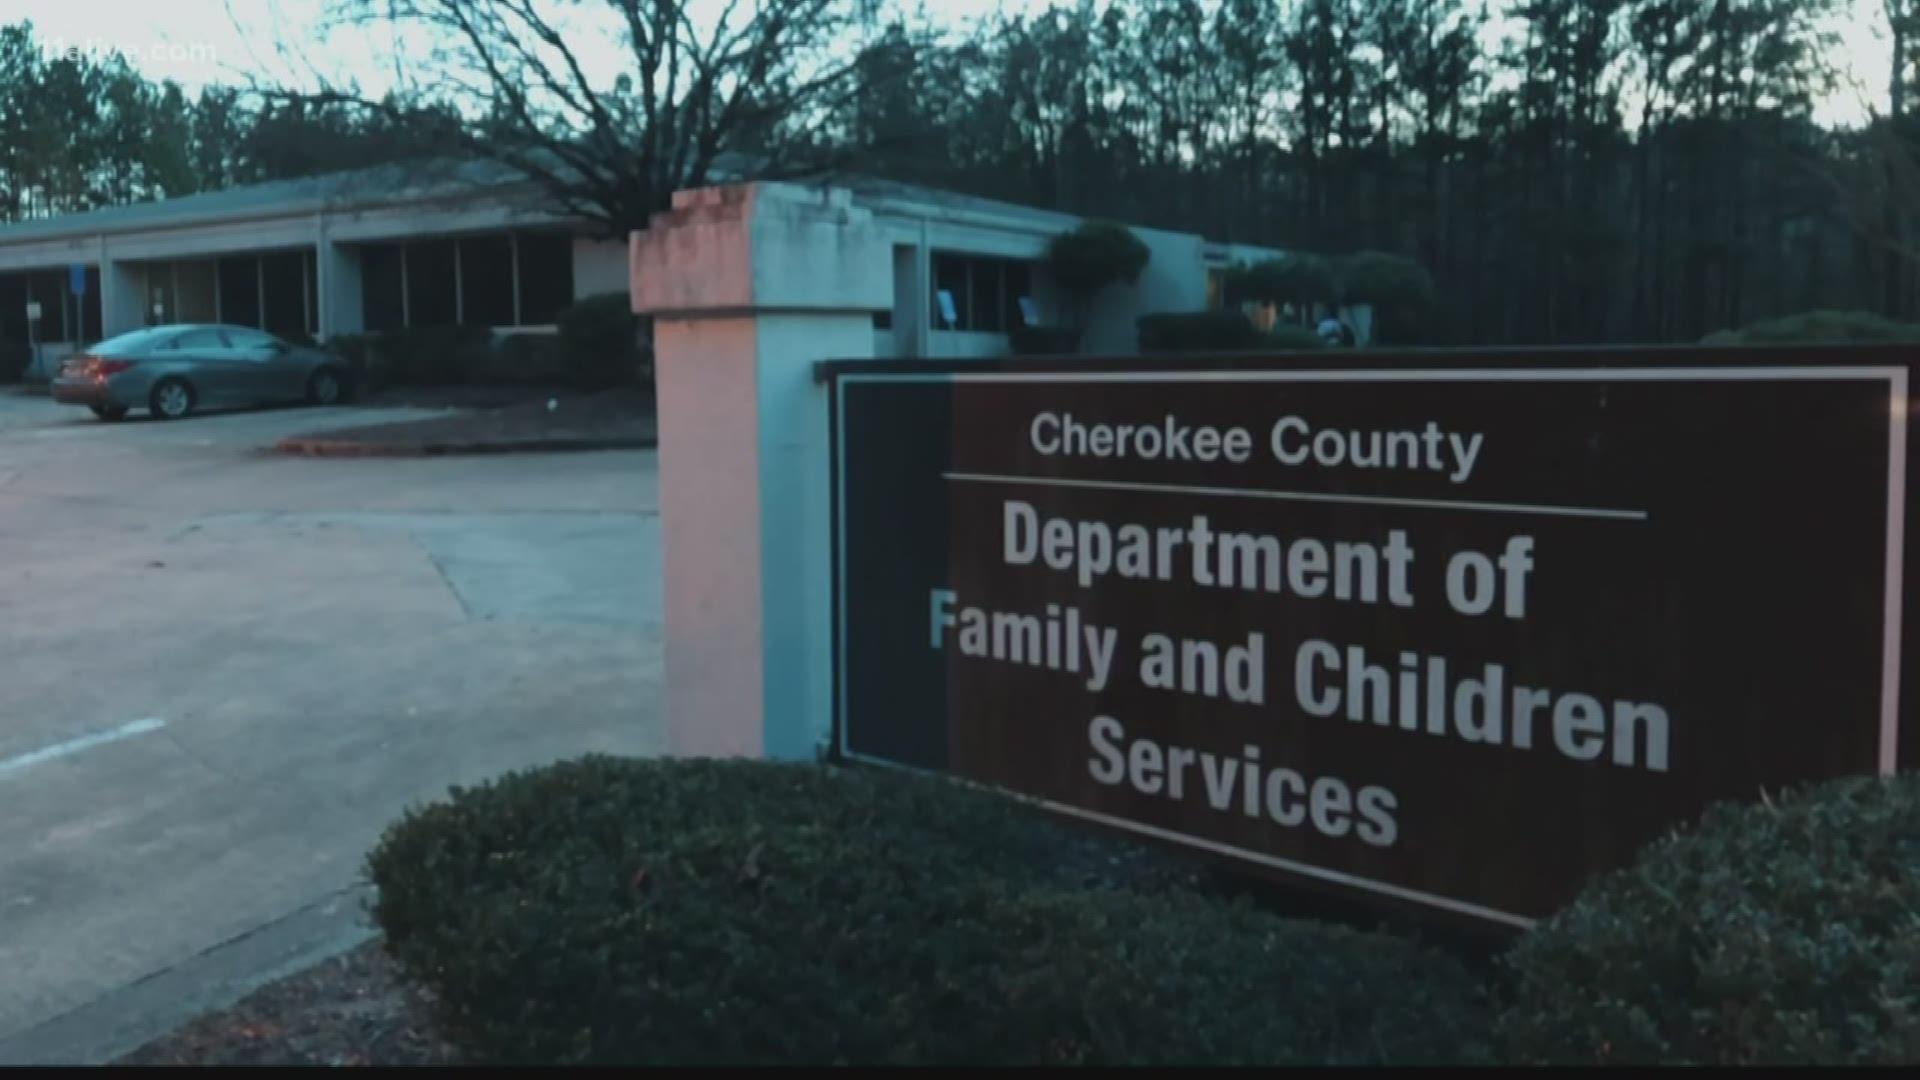 A man sexually abused as a child by his foster mom wants to sue DFCS. Georgia law won’t let him.